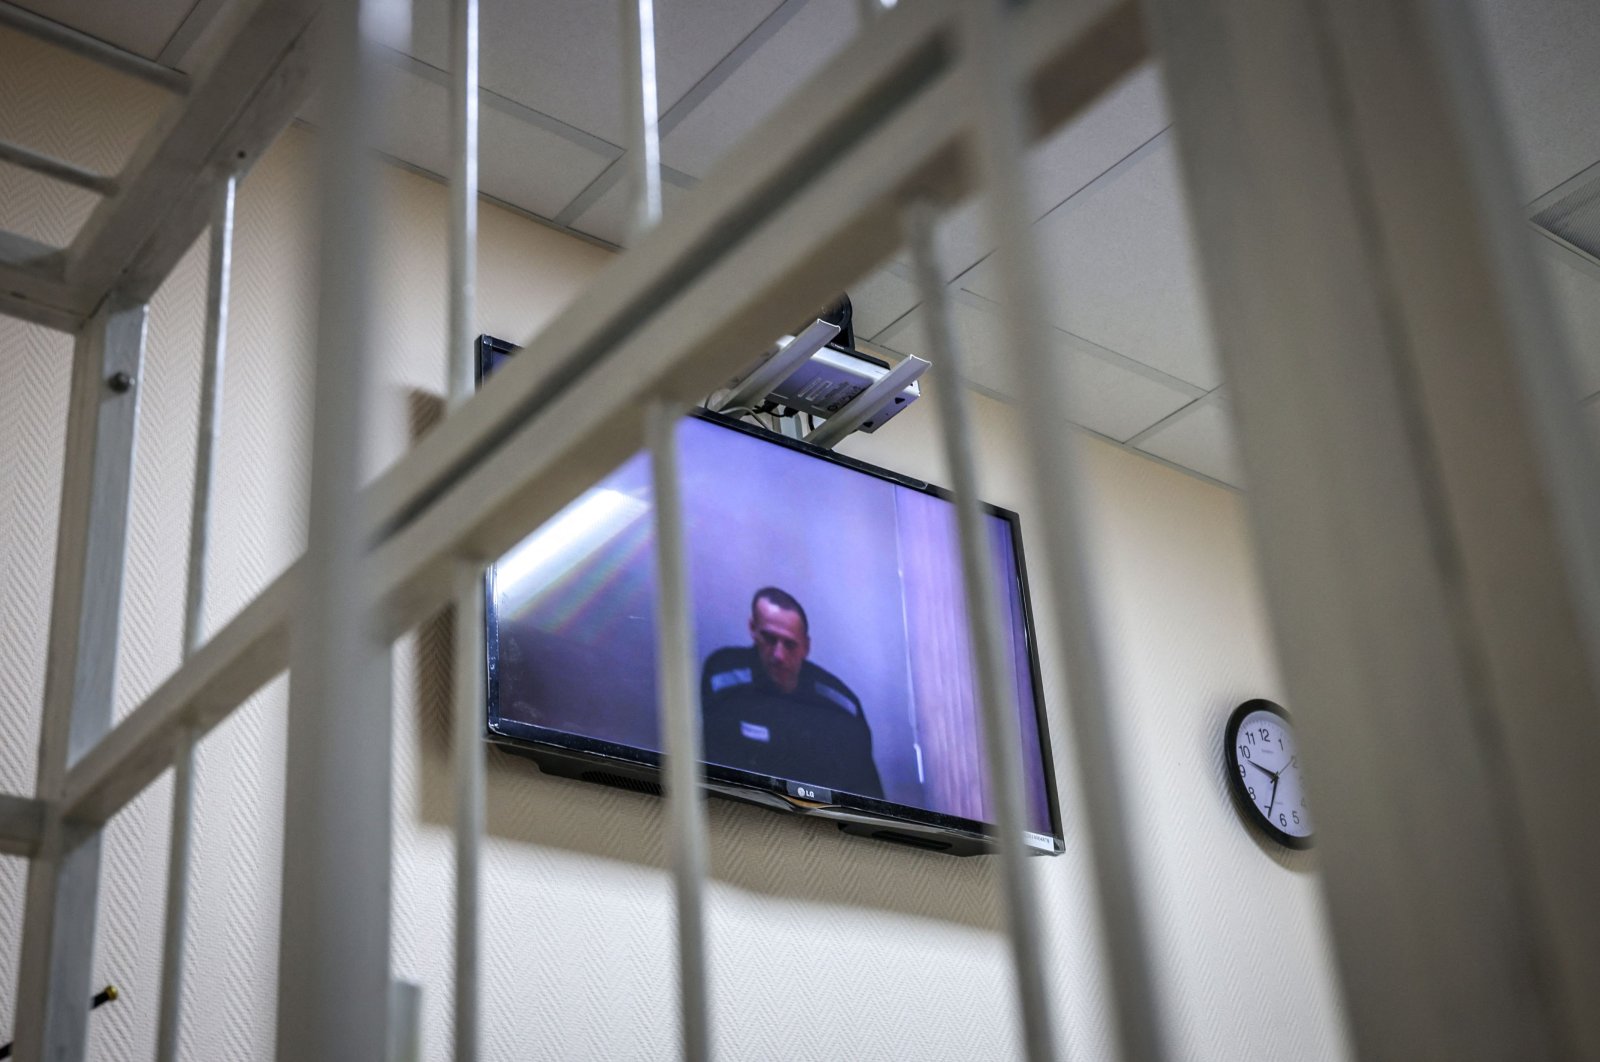 Jailed Kremlin critic Alexei Navalny appears on screen via a video link from prison during a court hearing, at a court in the town of Petushki some 120 kilometers outside Moscow, May 26, 2021. (AFP Photo)